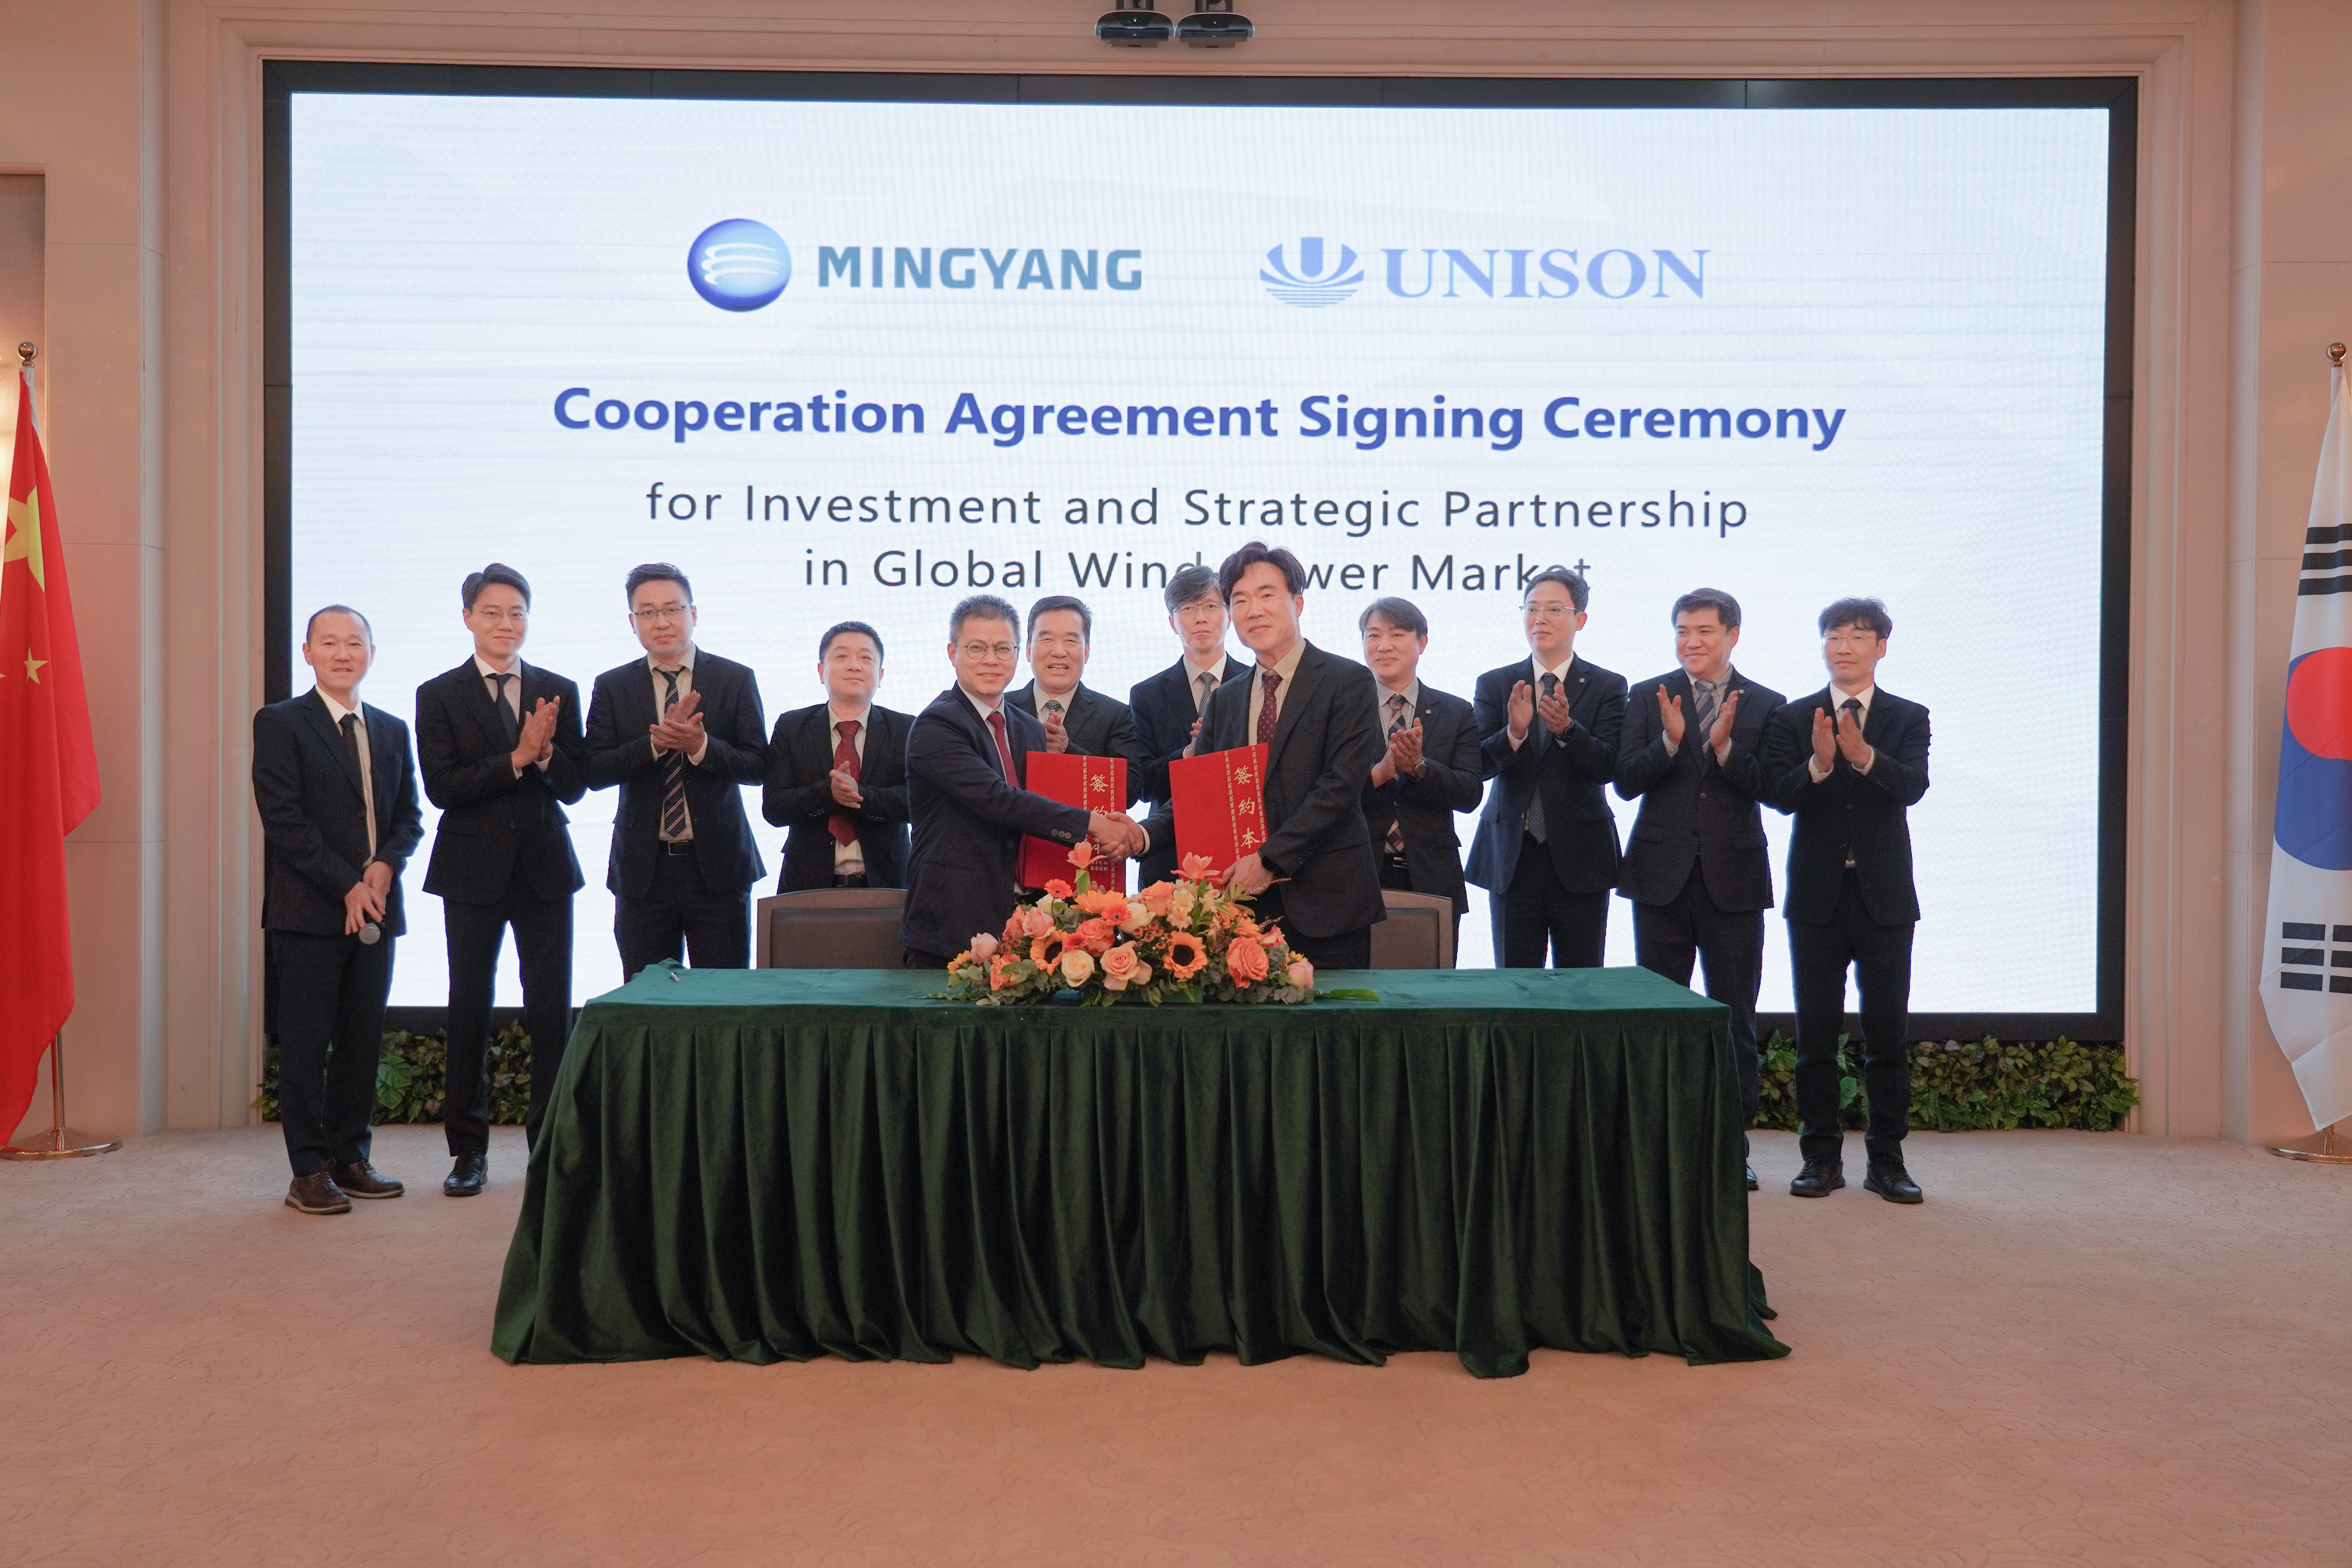 Mingyang Smart Energy Expands Global Business through Cooperation with Unison